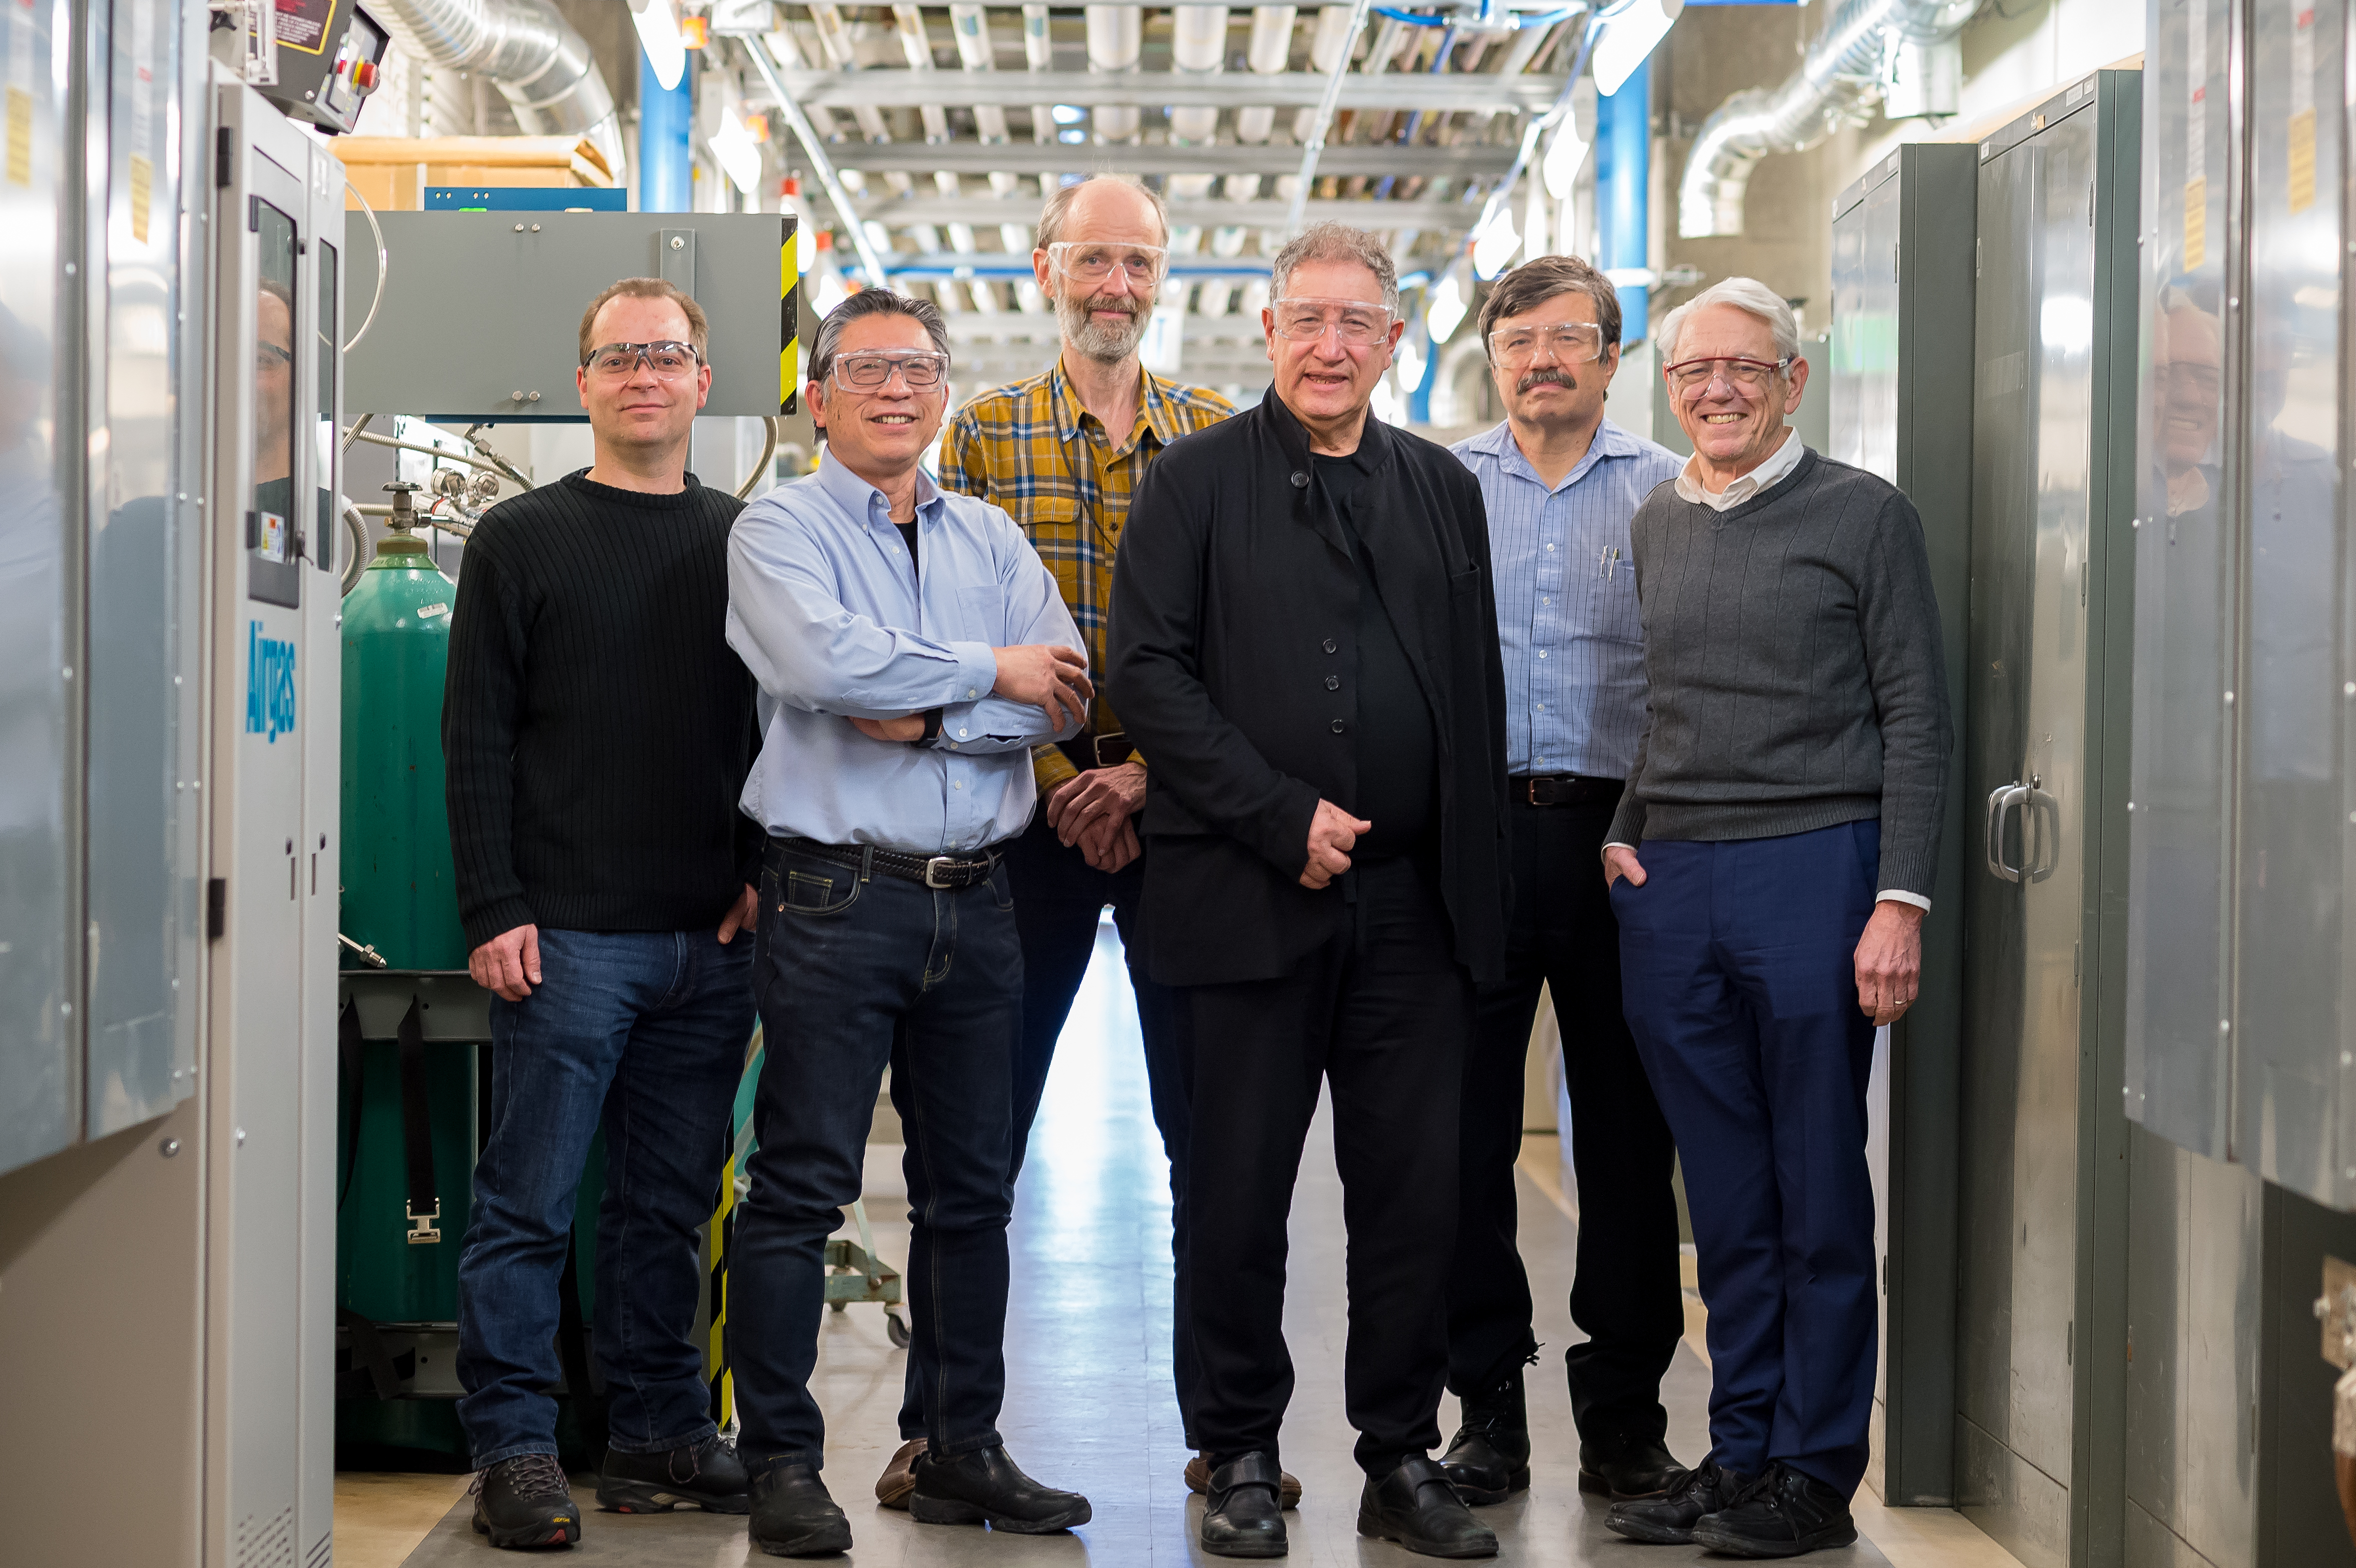 Vinokur and some of his Argonne colleagues who have contributed to Vinokur’s research throughout his career; From left to right: Andreas Glatz, Wai Kwok (Vinokur’s group leader), Ulrich Welp, Valerii Vinokur, Alexei Koshelev and George Crabtree (Vinokur’s previous group leader); Koshelev and Glatz are part of Vinokur’s Quantum Mesoscopic Materials team. (Image by Argonne National Laboratory.)